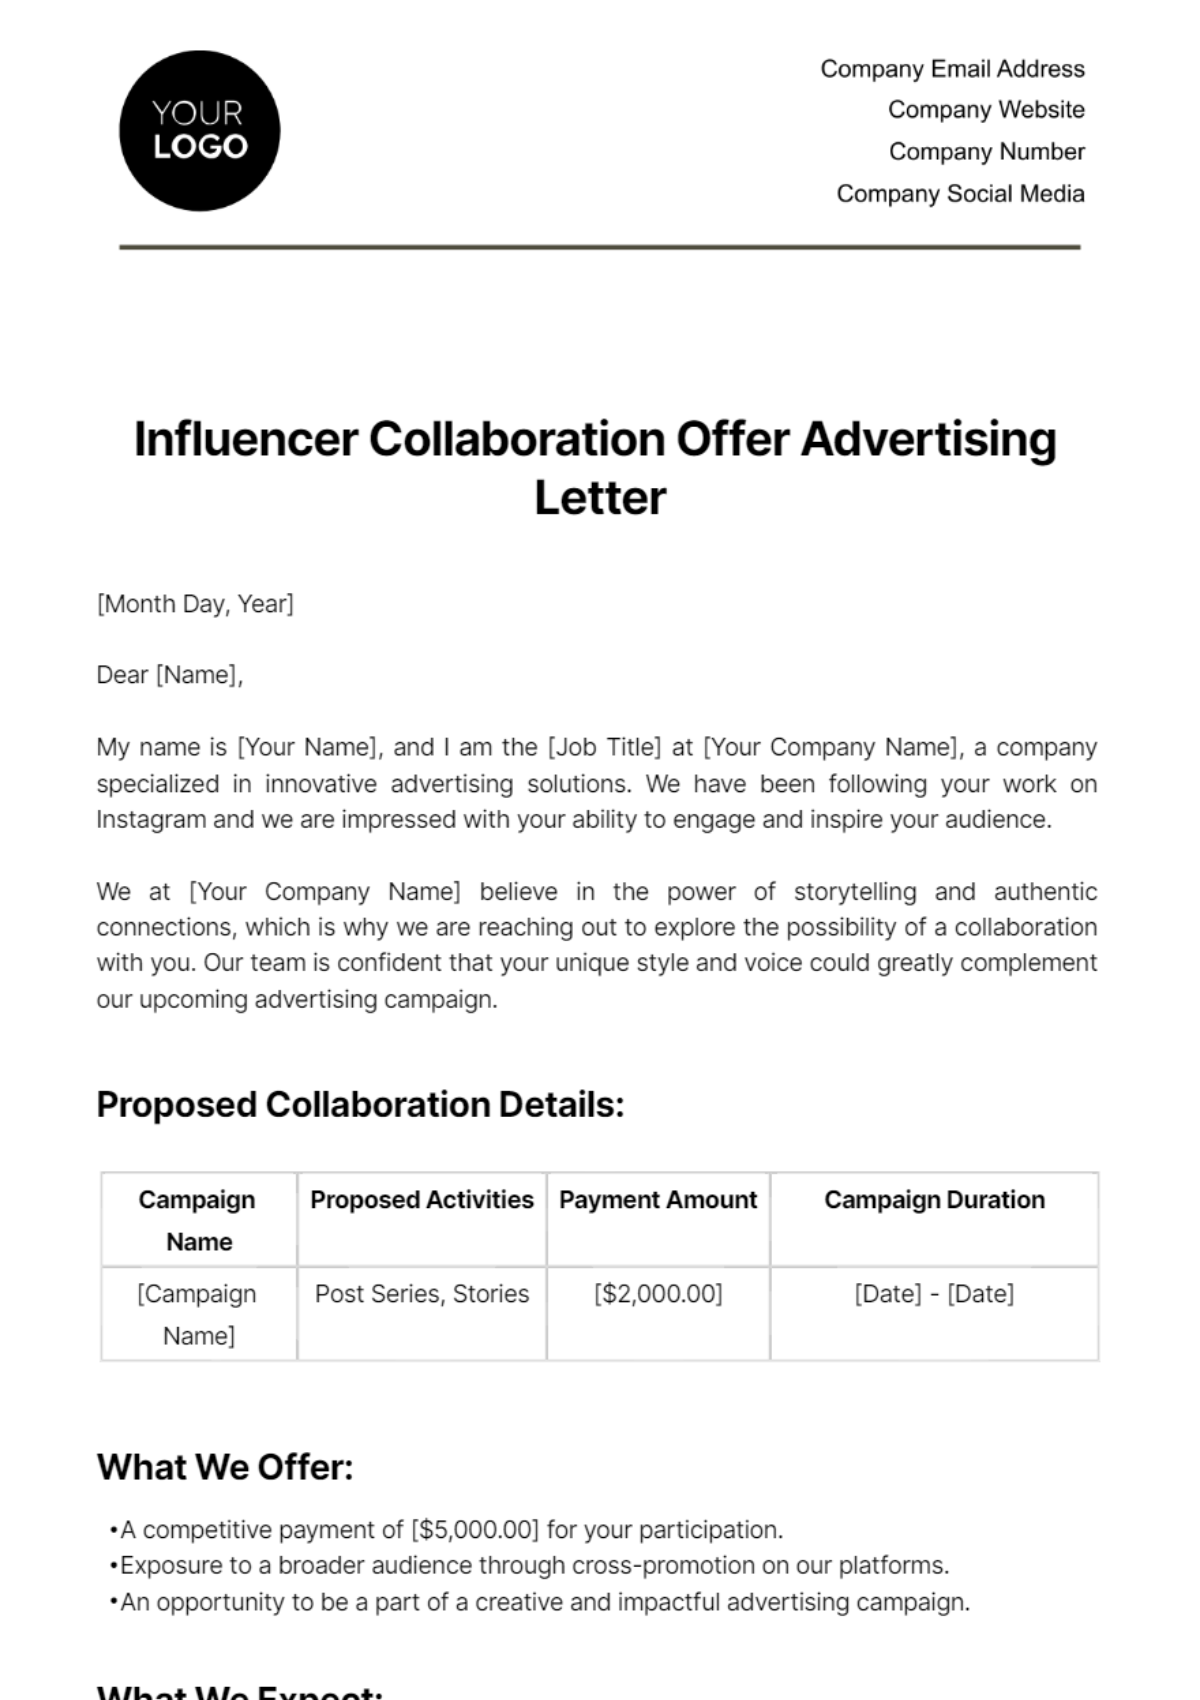 Free Influencer Collaboration Offer Advertising Letter Template